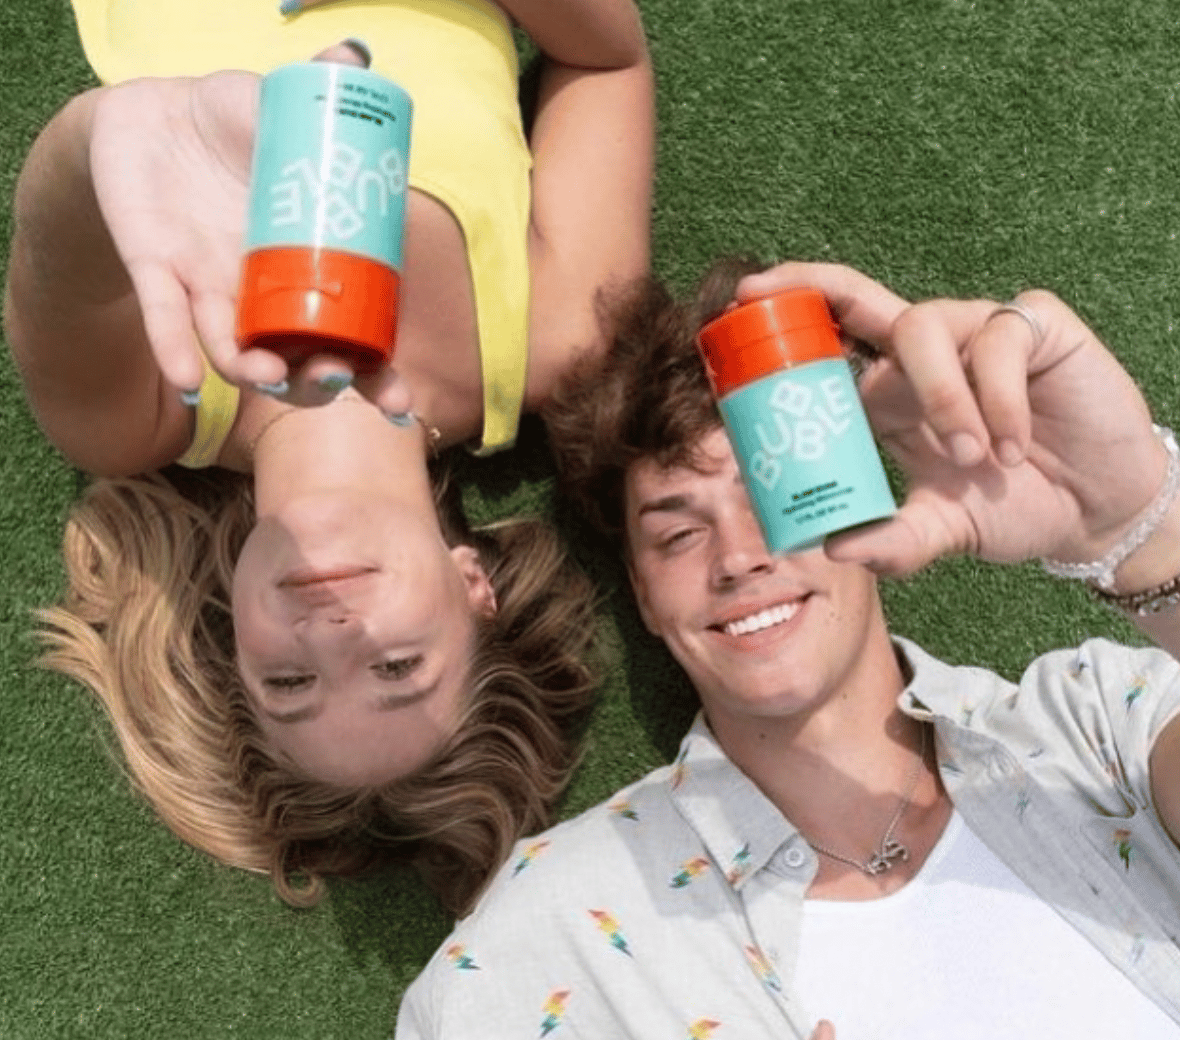 Hyram-Approved Brand Bubble Aims to Fill a Void in Teenage Skin Care